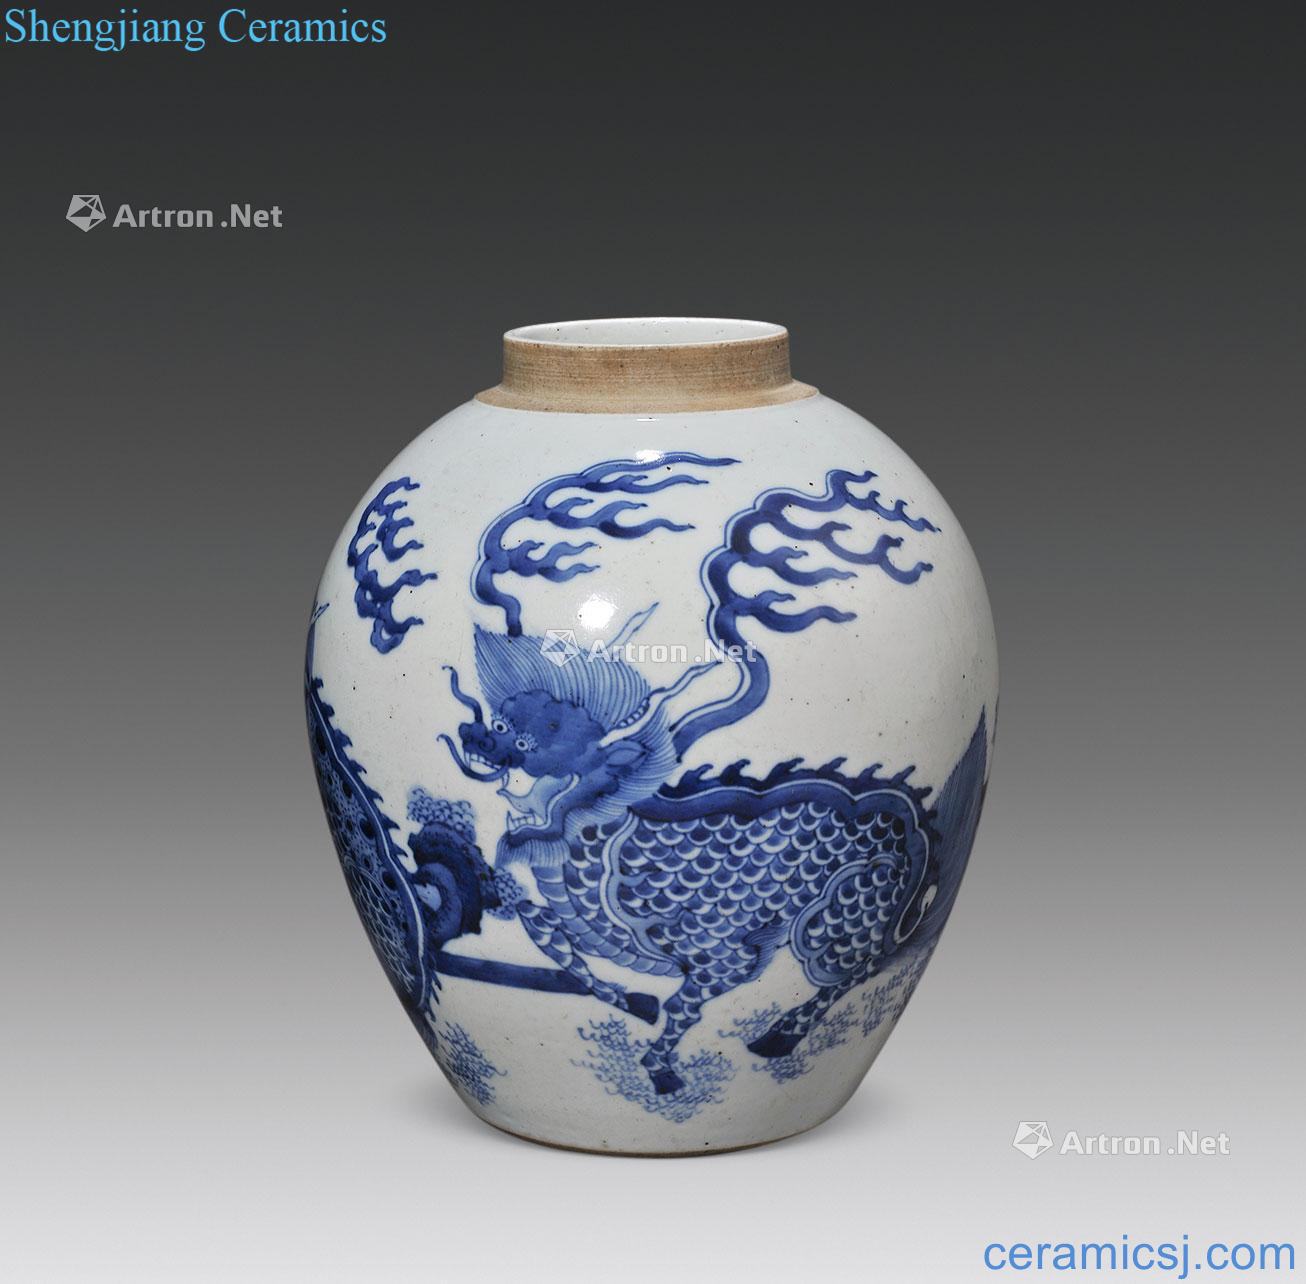 The late Ming dynasty Kirin figure canister